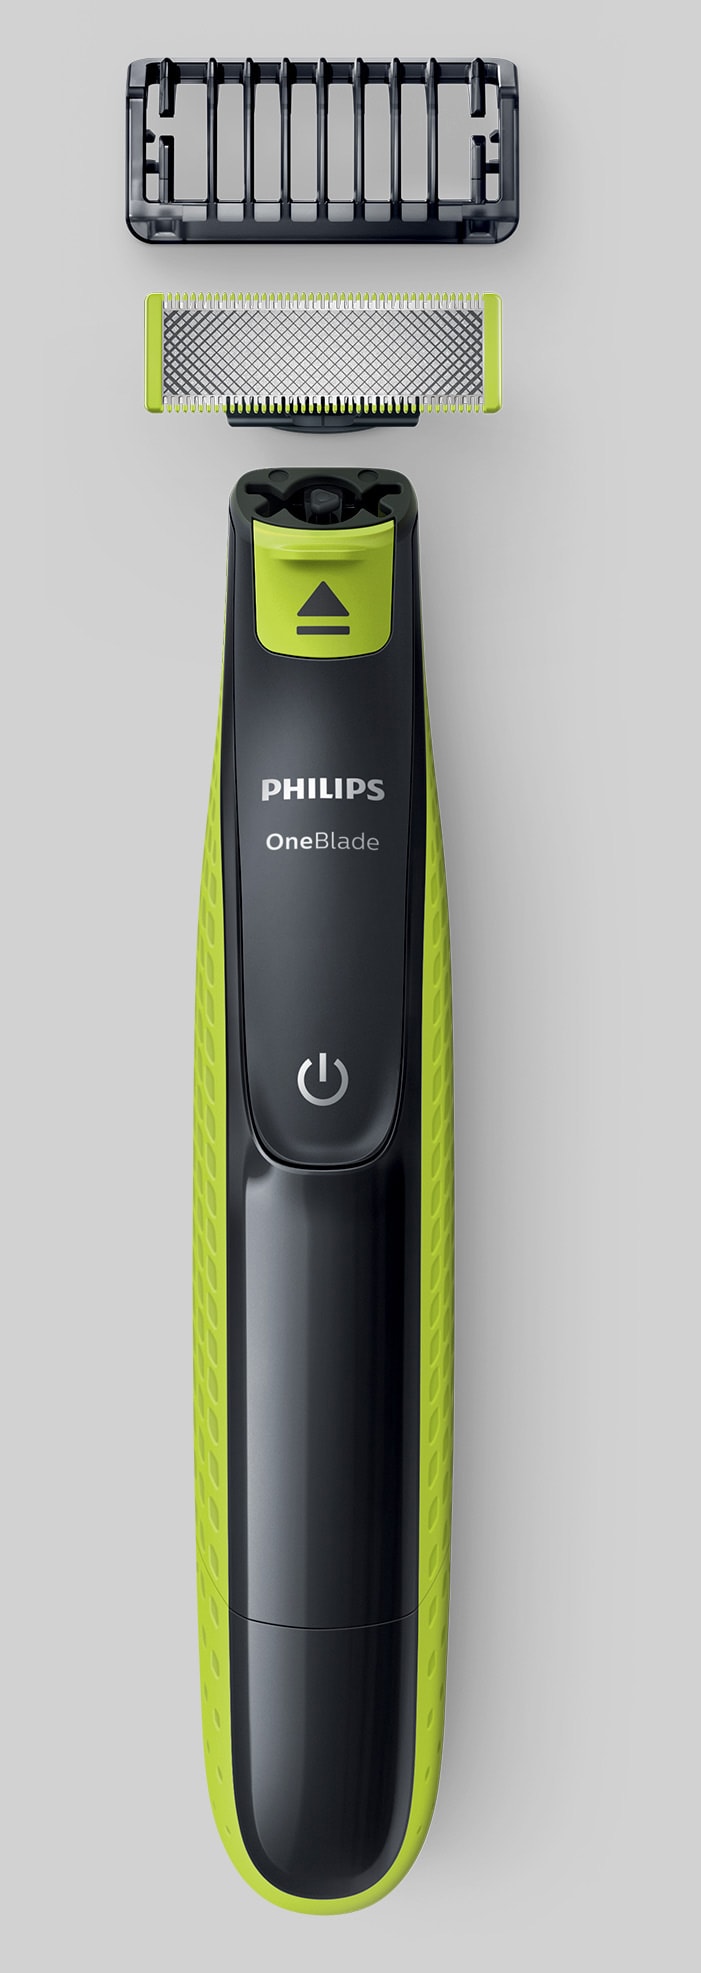 swan scared Suffix OneBlade. The new way to trim, edge and shave | Philips